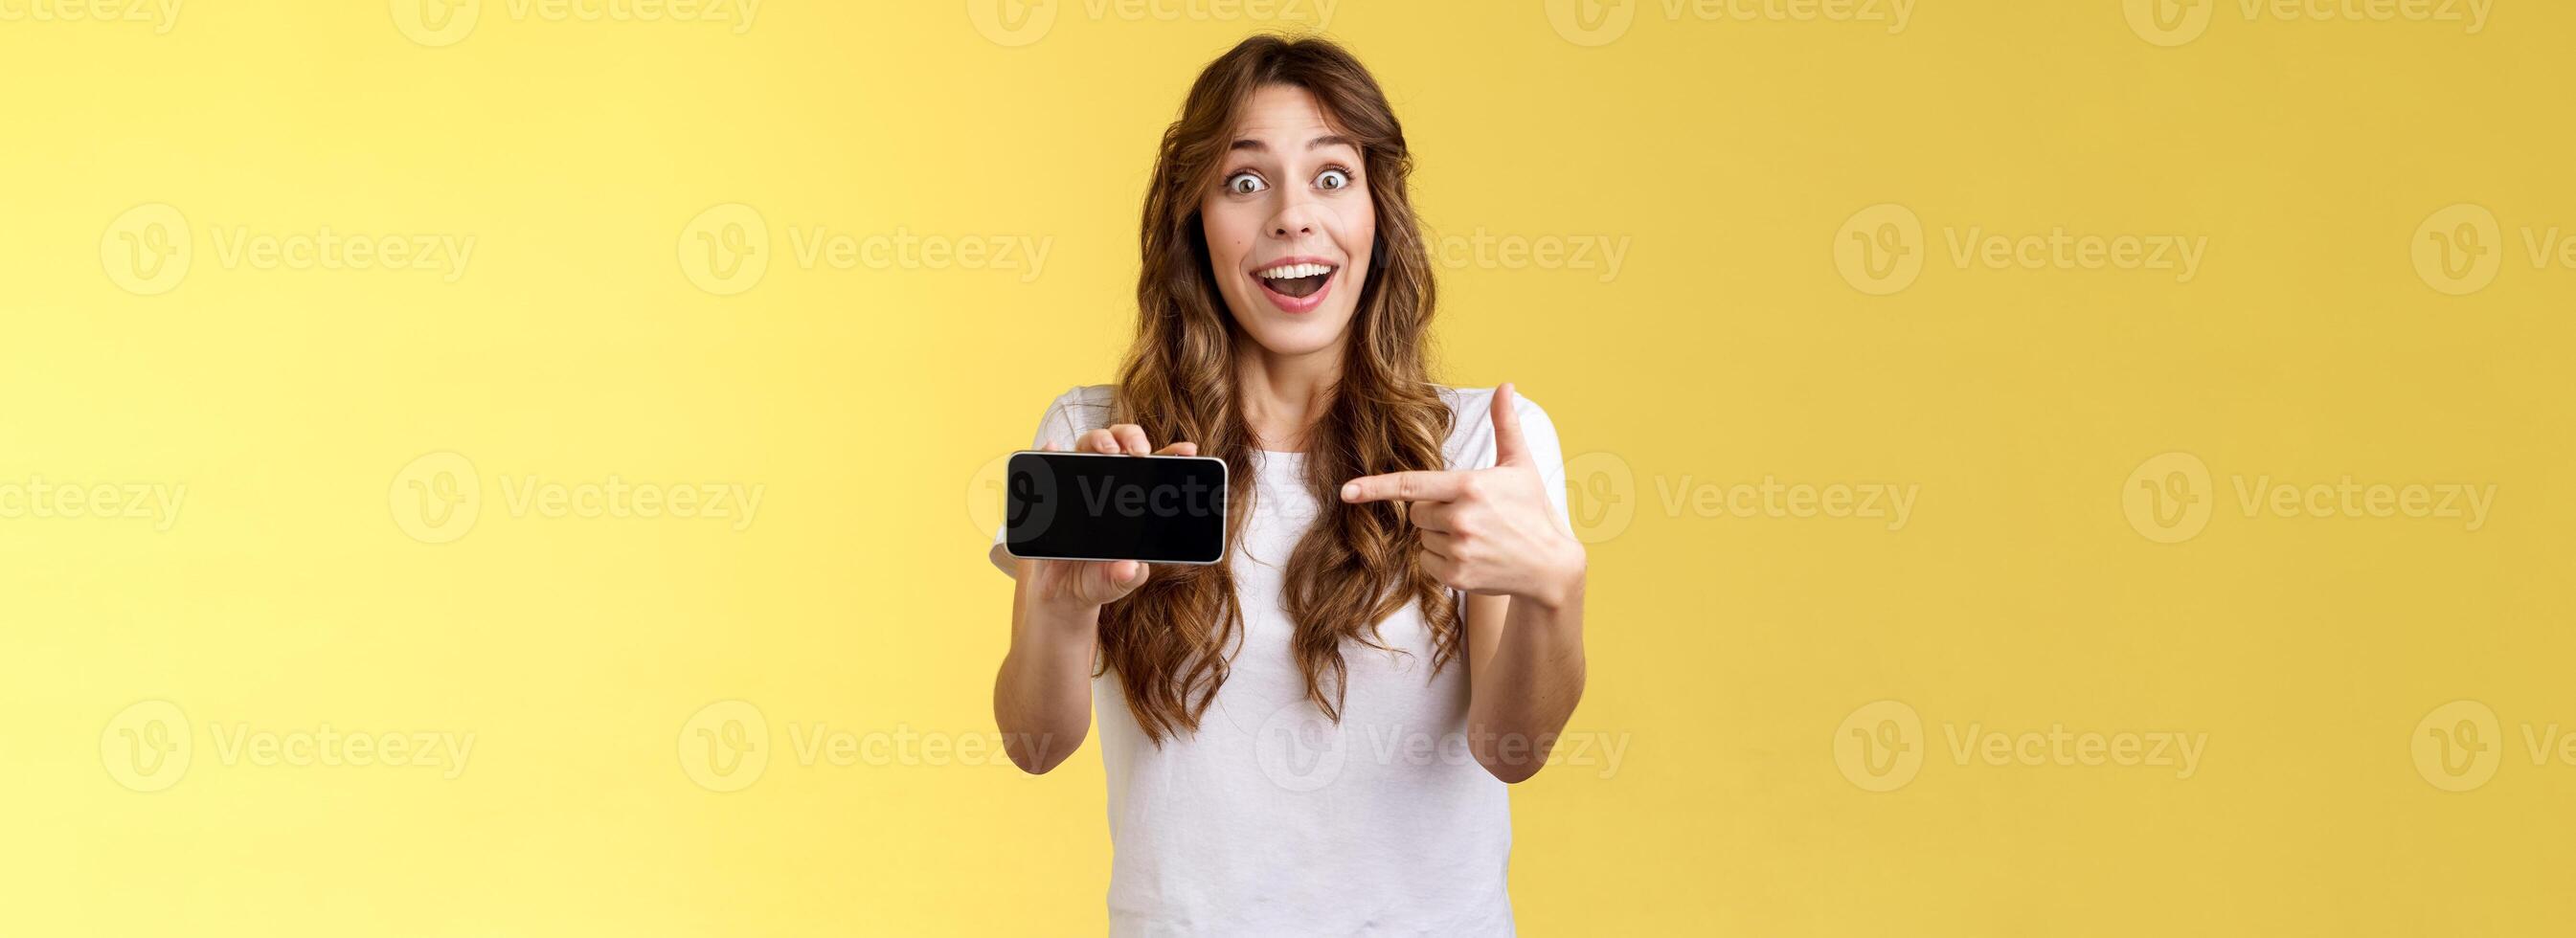 Impressed upbeat happy lucky girl curly long hairstyle open mouth admiration joy like awesome new app show smartphone screen horizontal phone display stand yellow background amazed photo